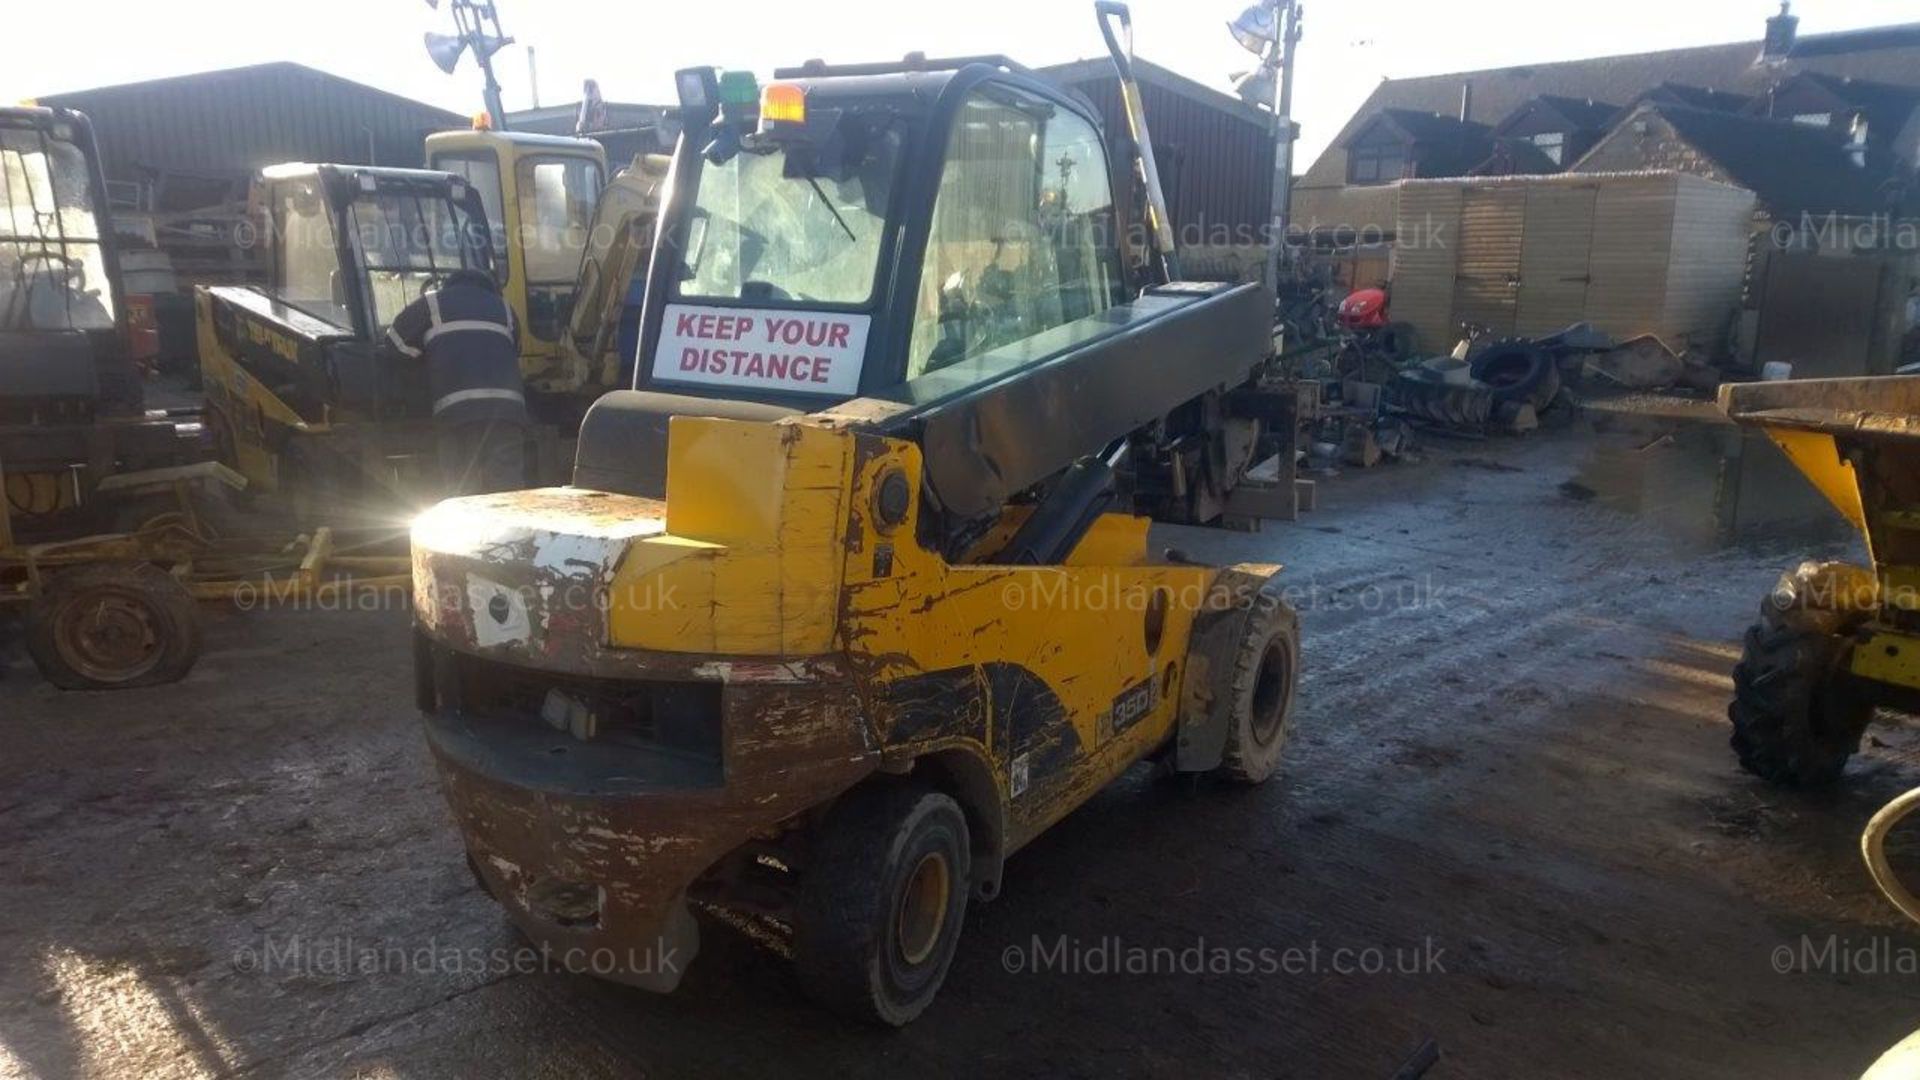 2009 JCB TELE TRUCK WITH ROTATOR - Image 2 of 8